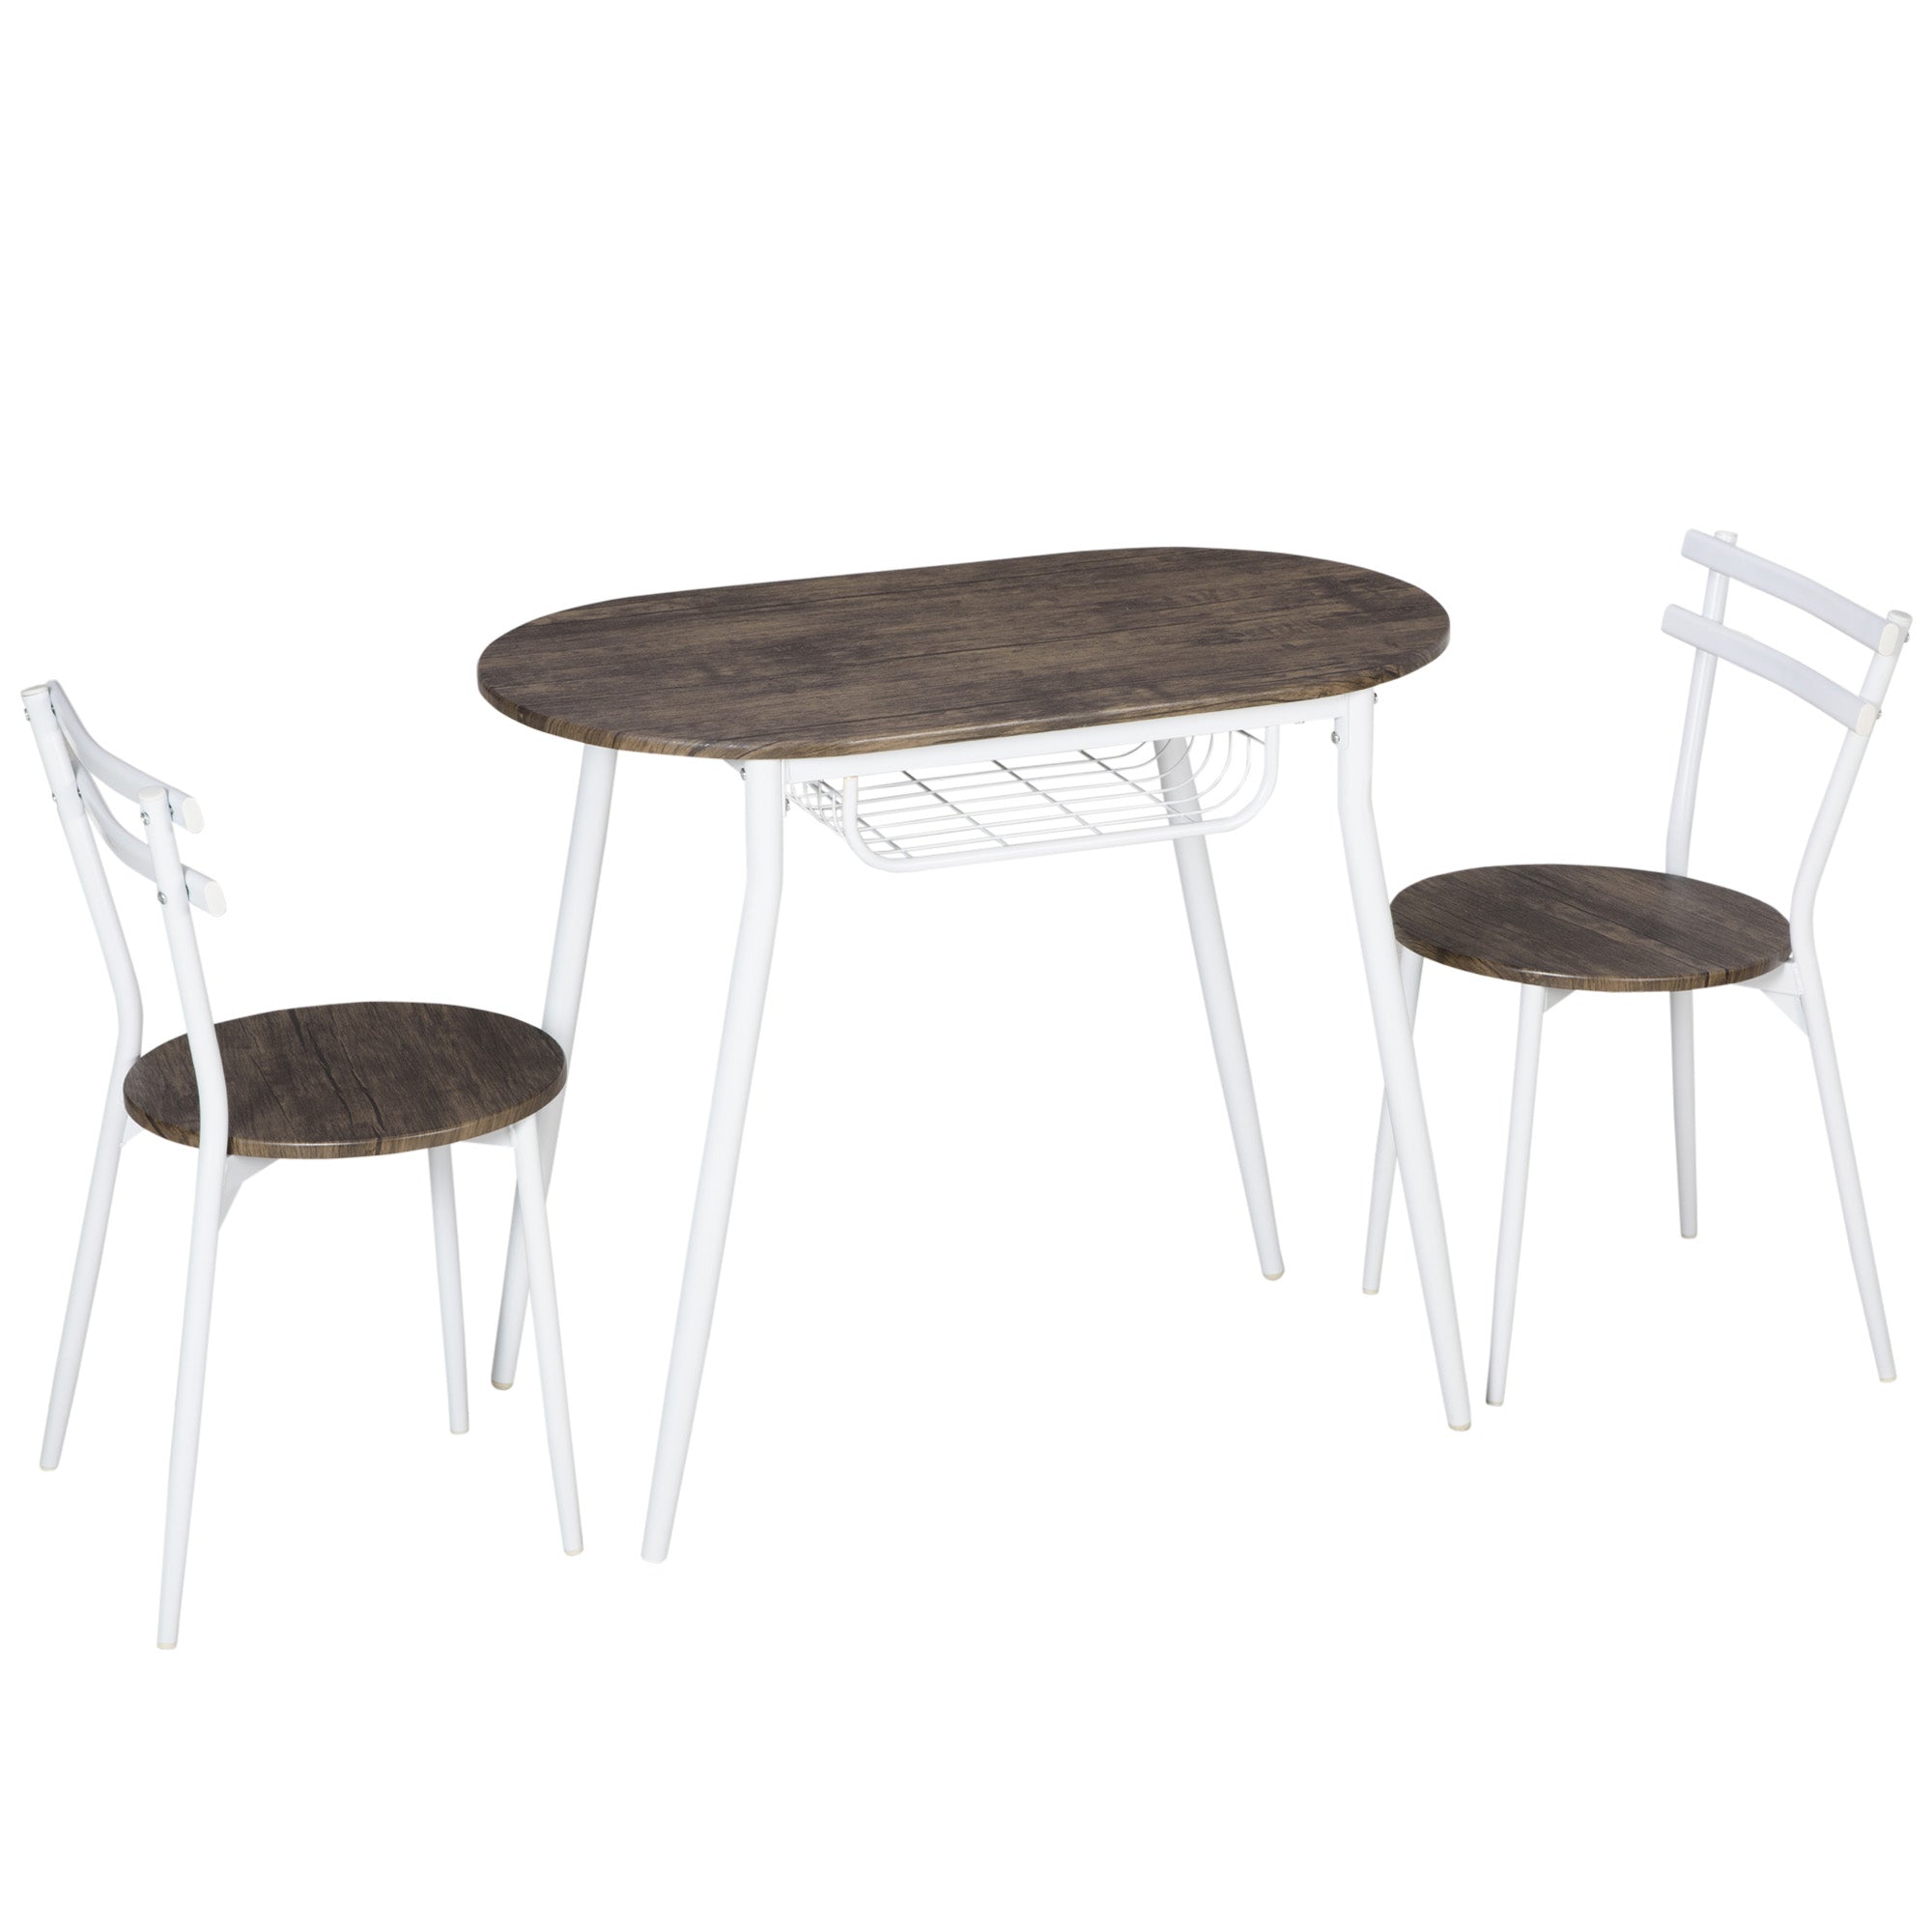 HOMCOM Dining Table and Chairs Set of 3 - Oval Kitchen Table with 2 Chairs  | TJ Hughes